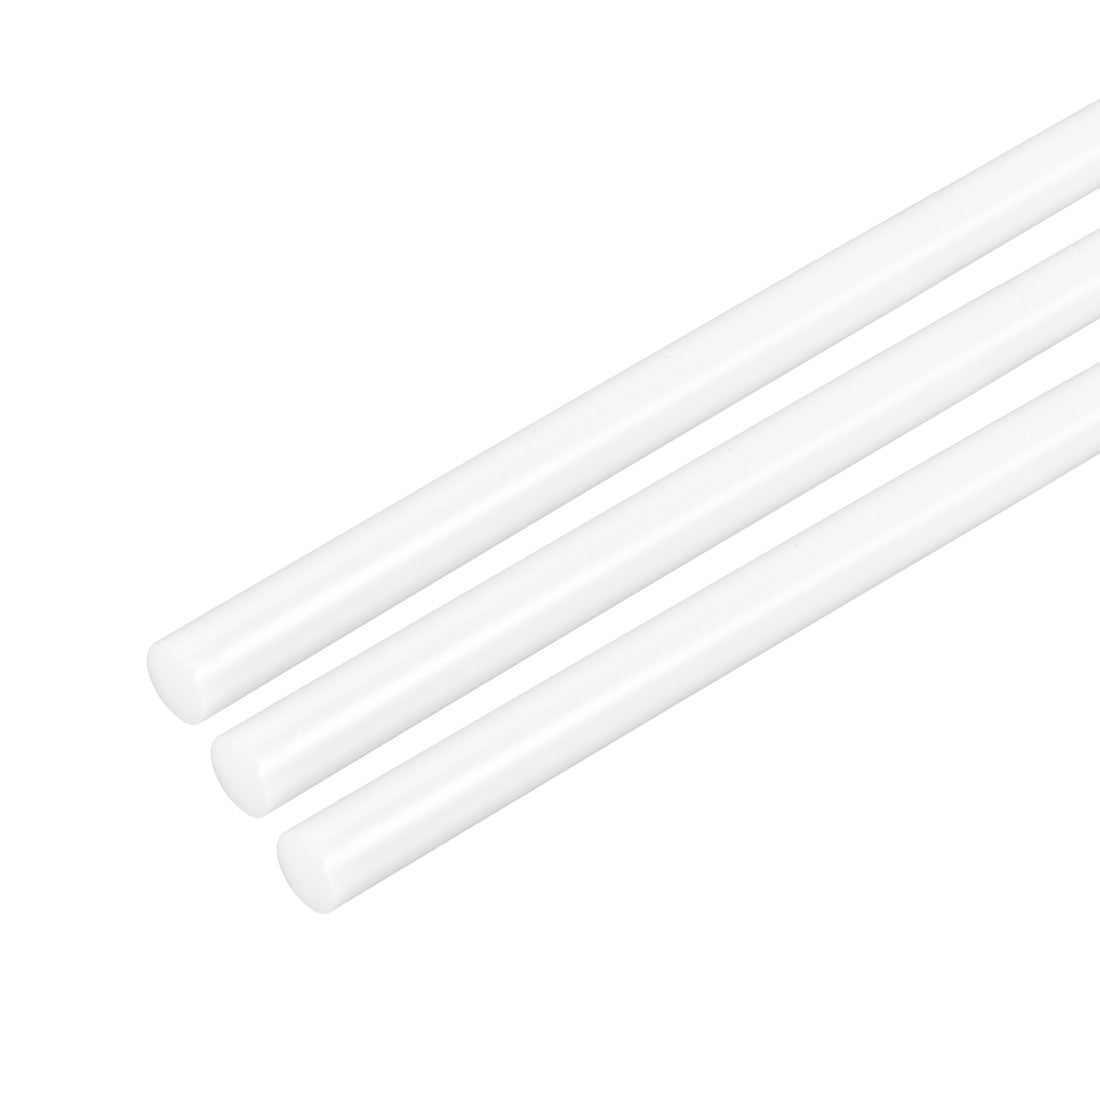 uxcell Uxcell Plastic Round Rod,4mm Dia 50cm White Engineering Plastic Round Bar 3pcs